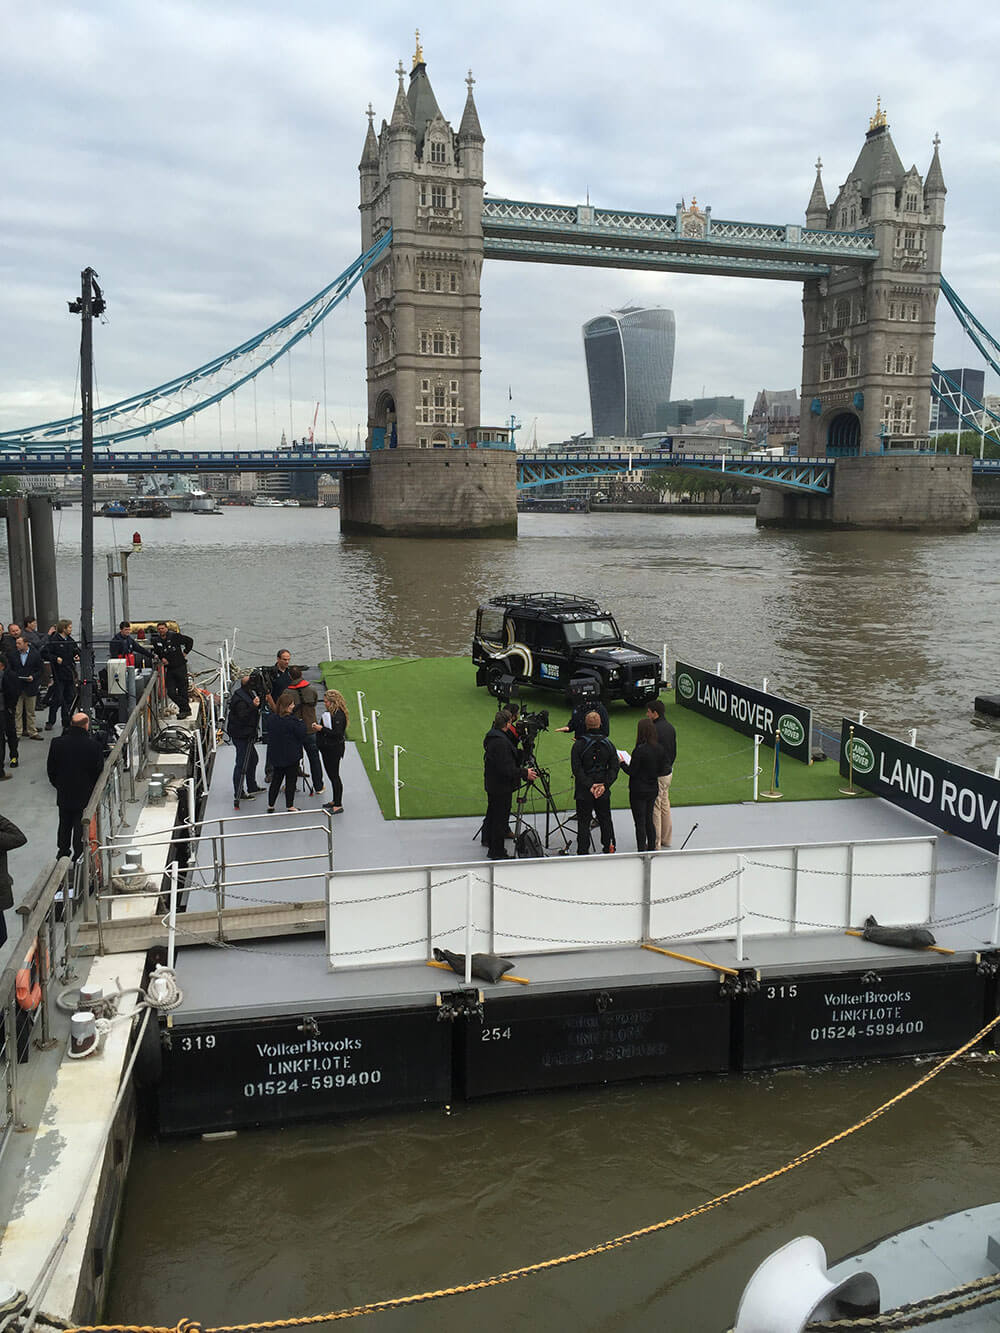 land rover rugby world cup butler's wharf pier